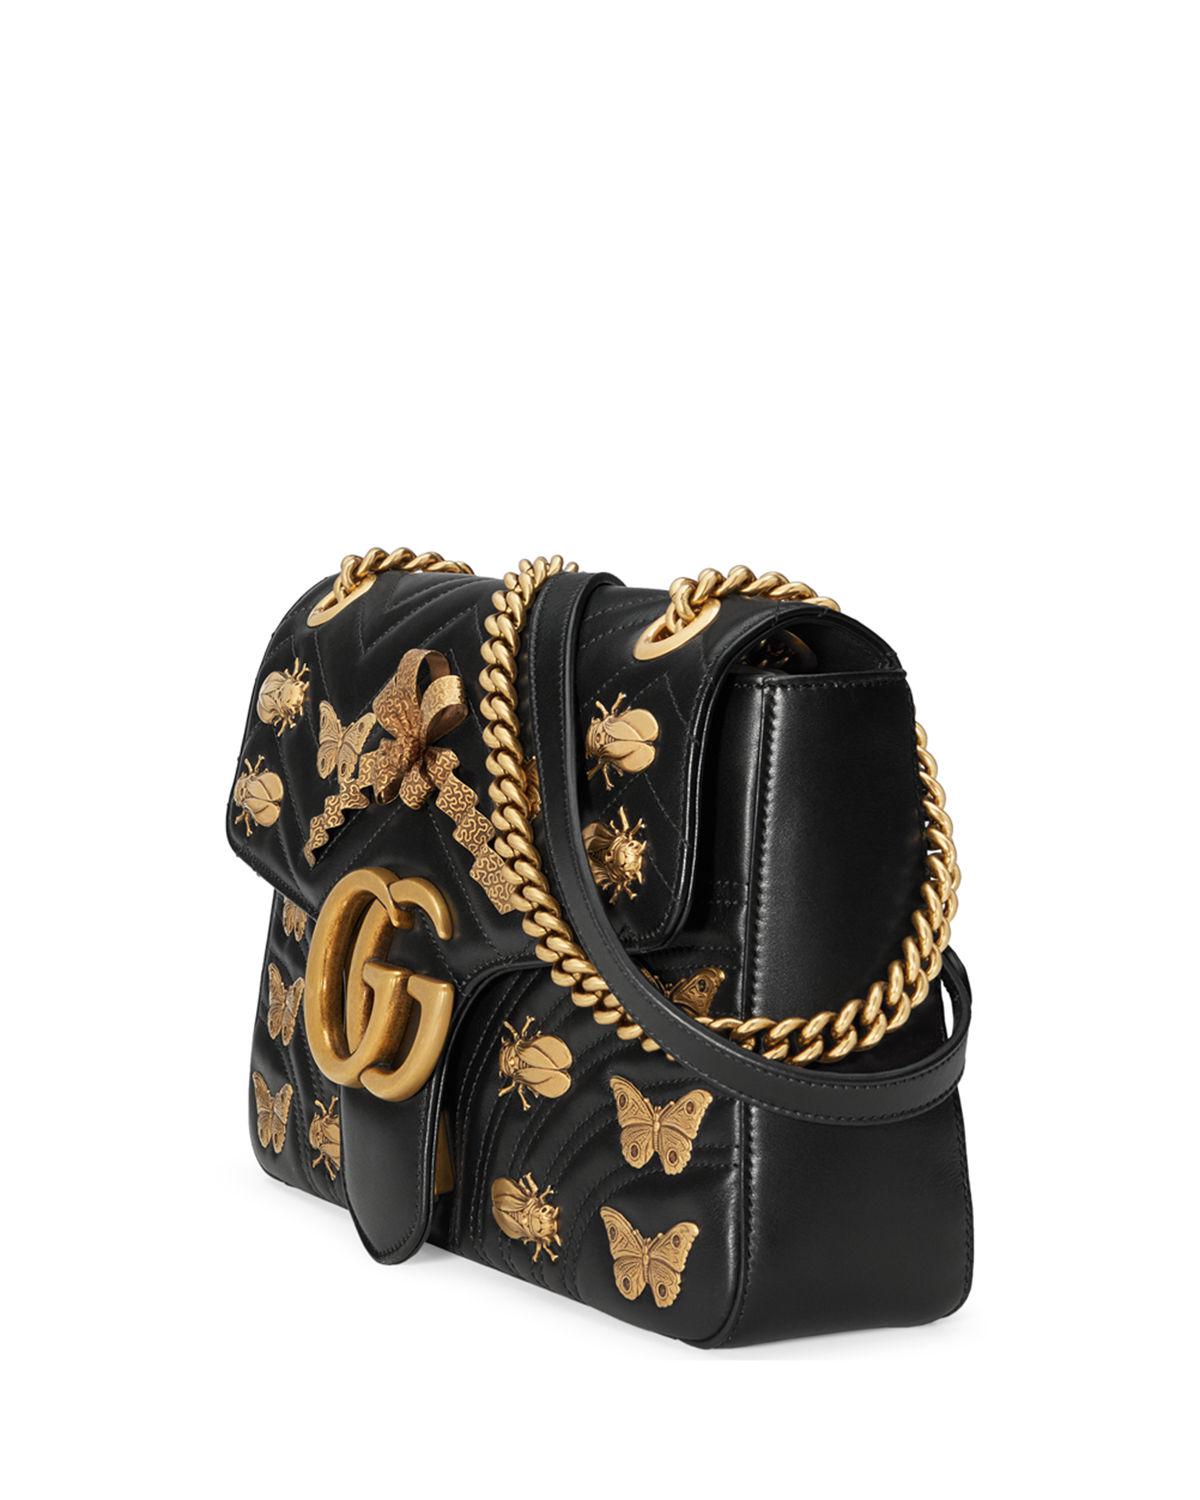 Gucci Leather Gg Marmont 2.0 Medium Insect Shoulder Bag in Black - Lyst